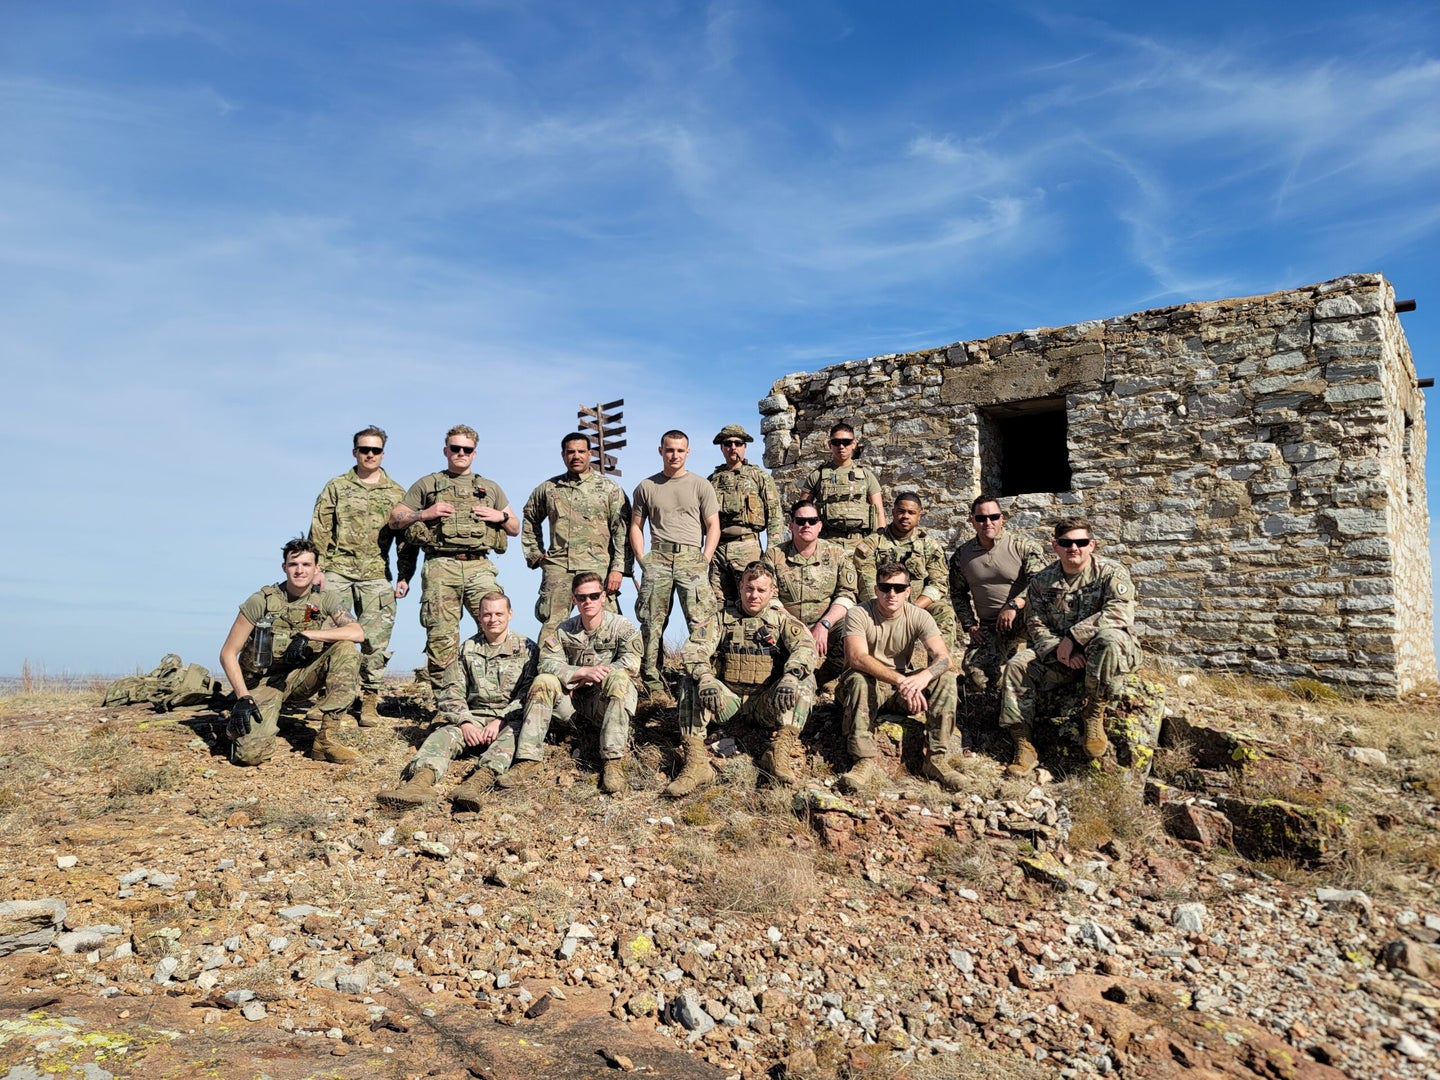 U.S. Army Explosive Ordnance Disposal technicians from the 761st Ordnance Company (EOD) pose in front the Block House on Fort Sill, Oklahoma. During a two-day mission, the company cleared a path through 145 unexploded rounds on an artillery range to historic building to enable a visit by 40 senior leaders from the Fires Center of Excellence. Courtesy photo.